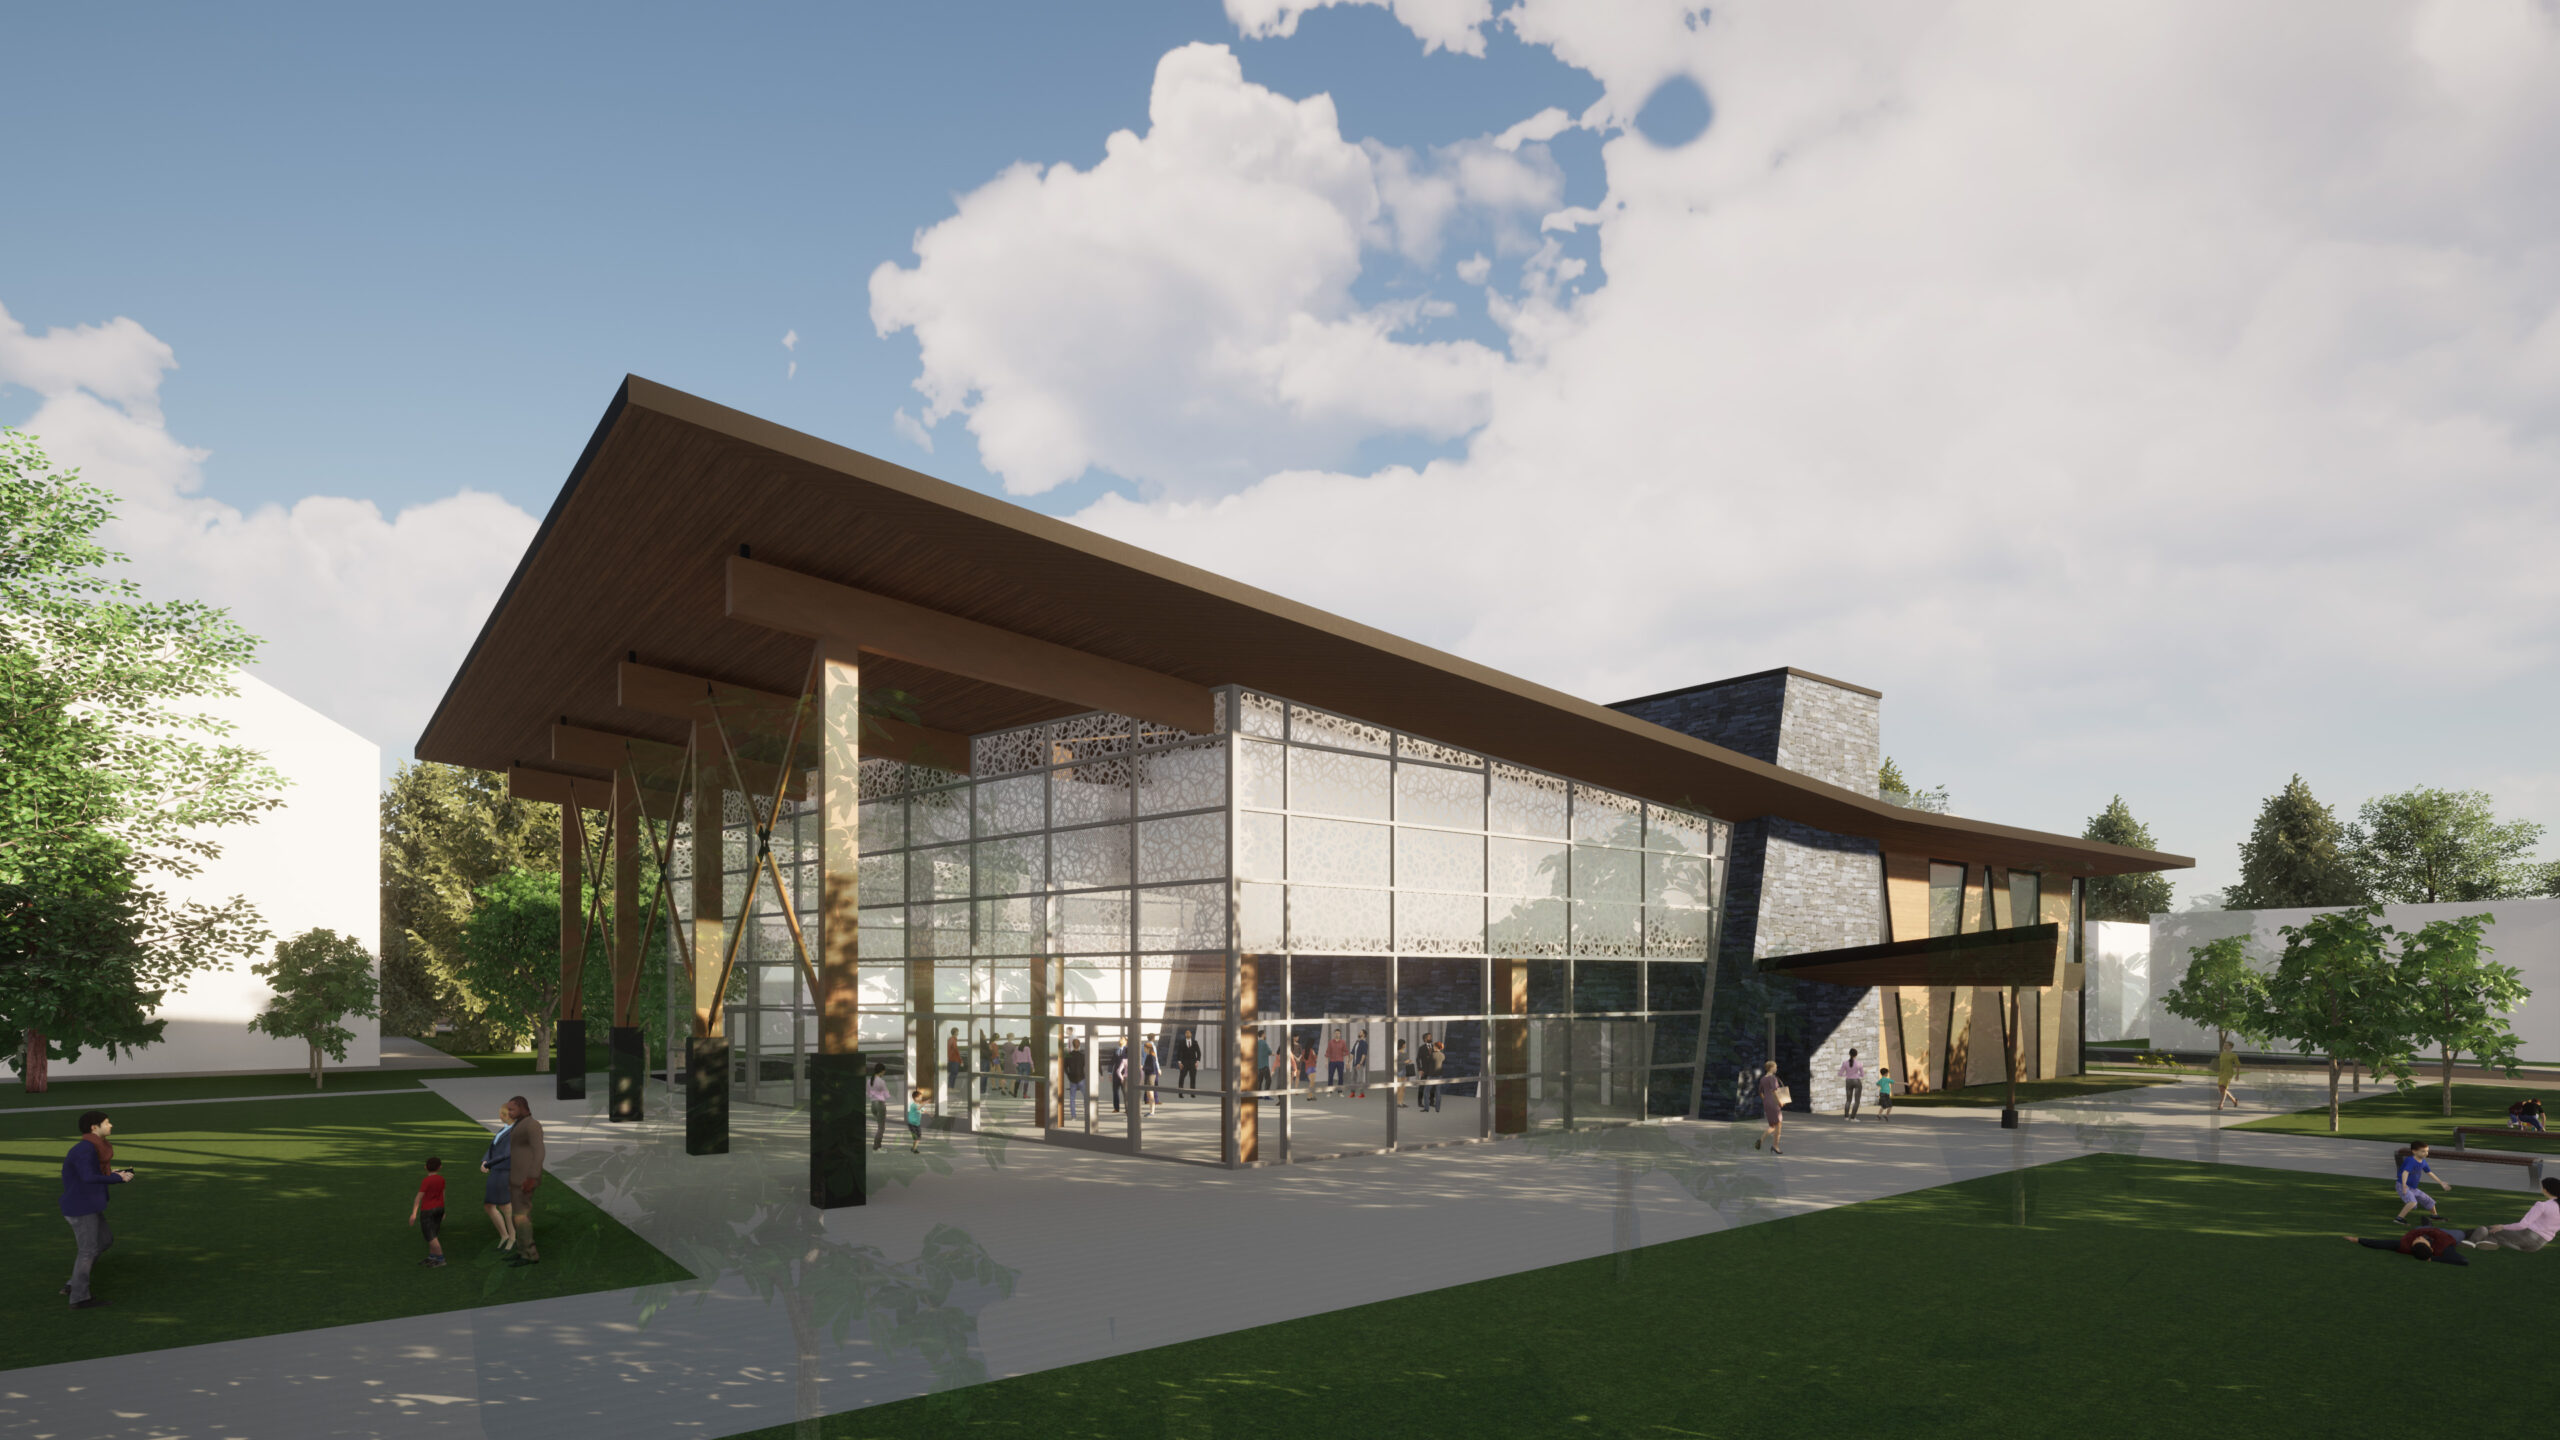 Exterior visualization of Community building, designed by nba architects. Project is focused on sustainable construction and includes traditional exposed mass-timber, post & beam construction, and a low pitch long-span roof.